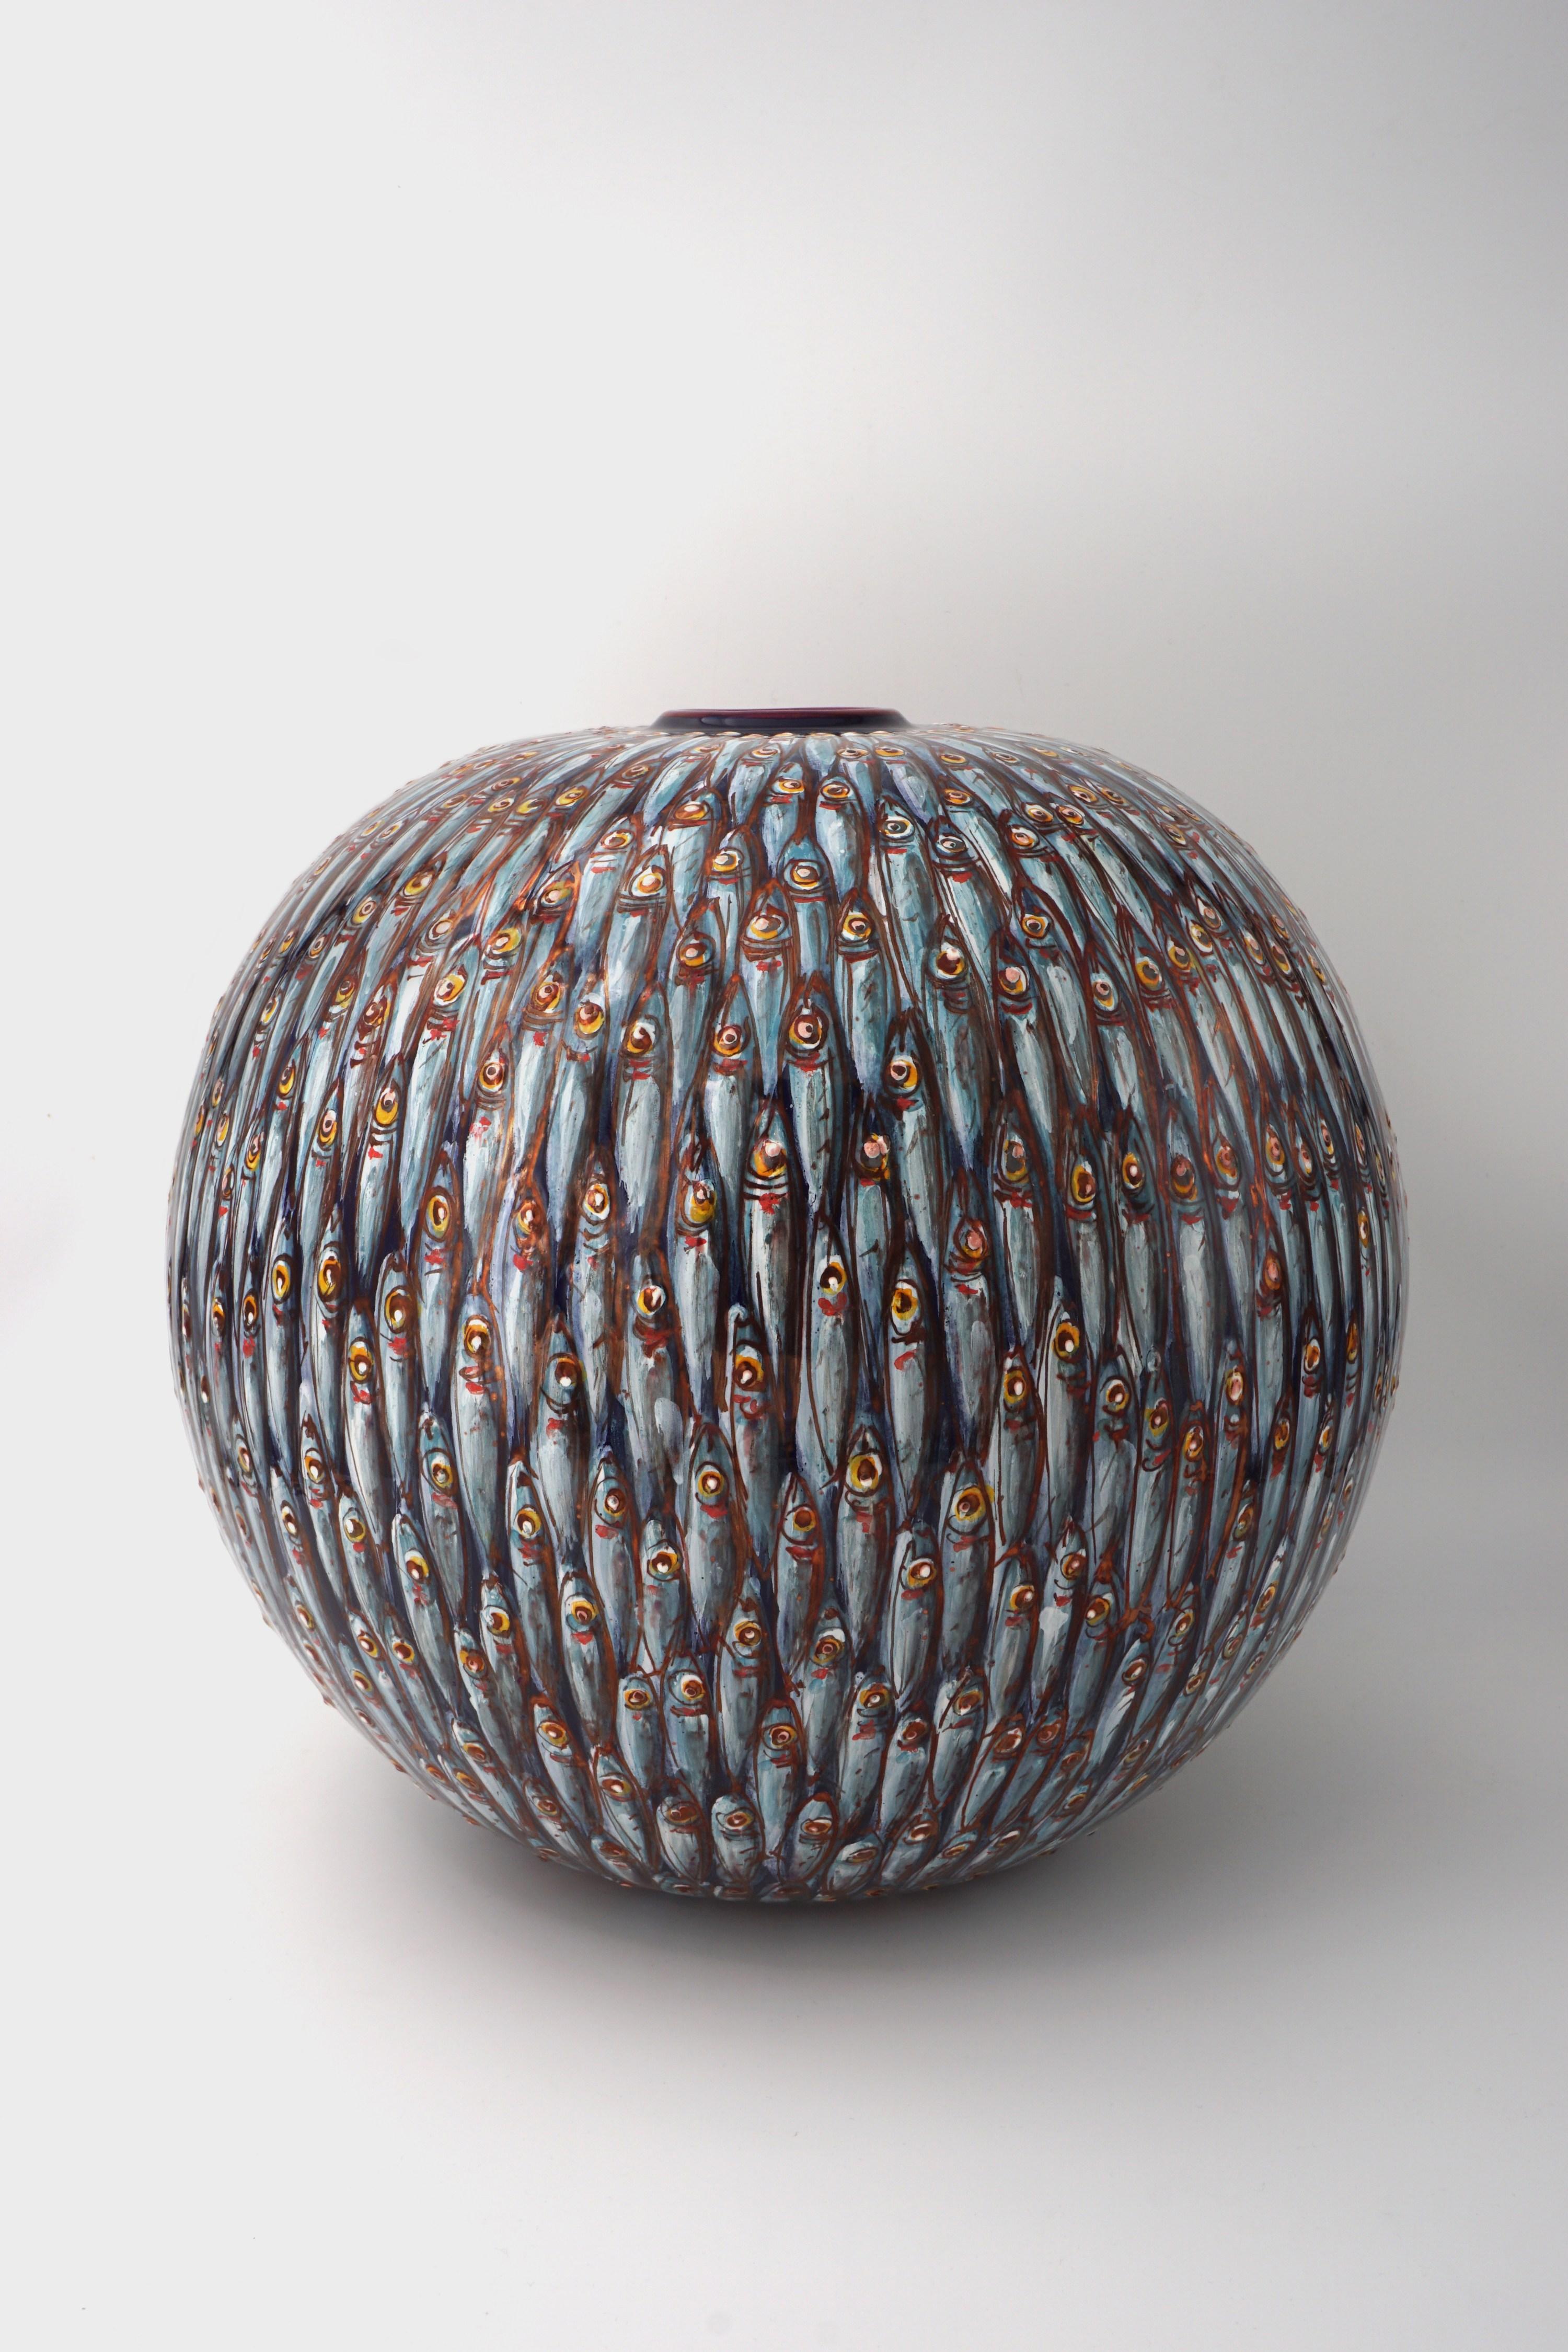 Mediterranea moon jar, 2020, full-fire reduction faience earthenware 40 cm diameter, hand painted unique piece.


Bottega Vignoli is a brand of artistic ceramics based in Faenza, one of the most representative ceramic production centres in Italy.